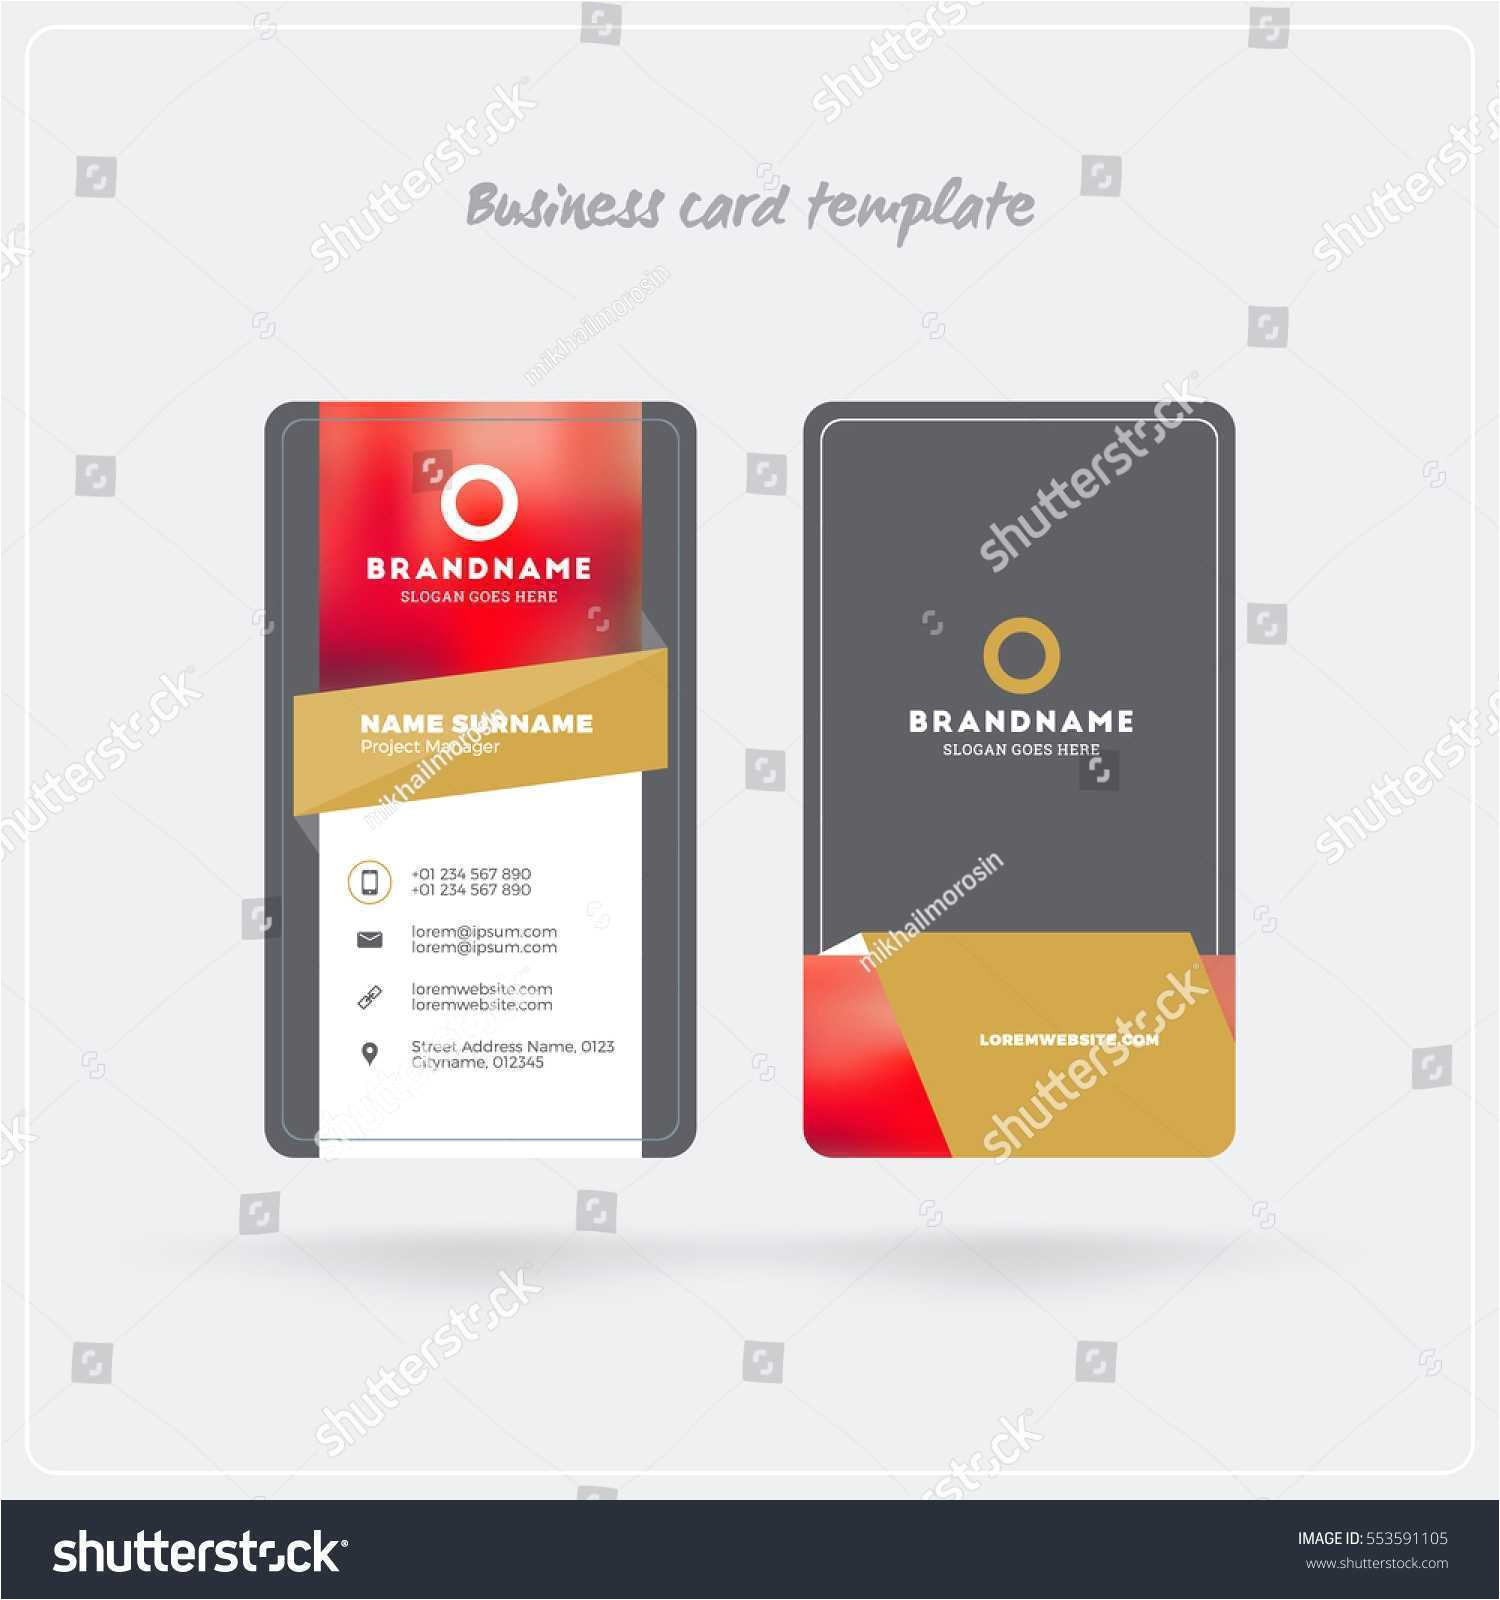 avery business card template 8373